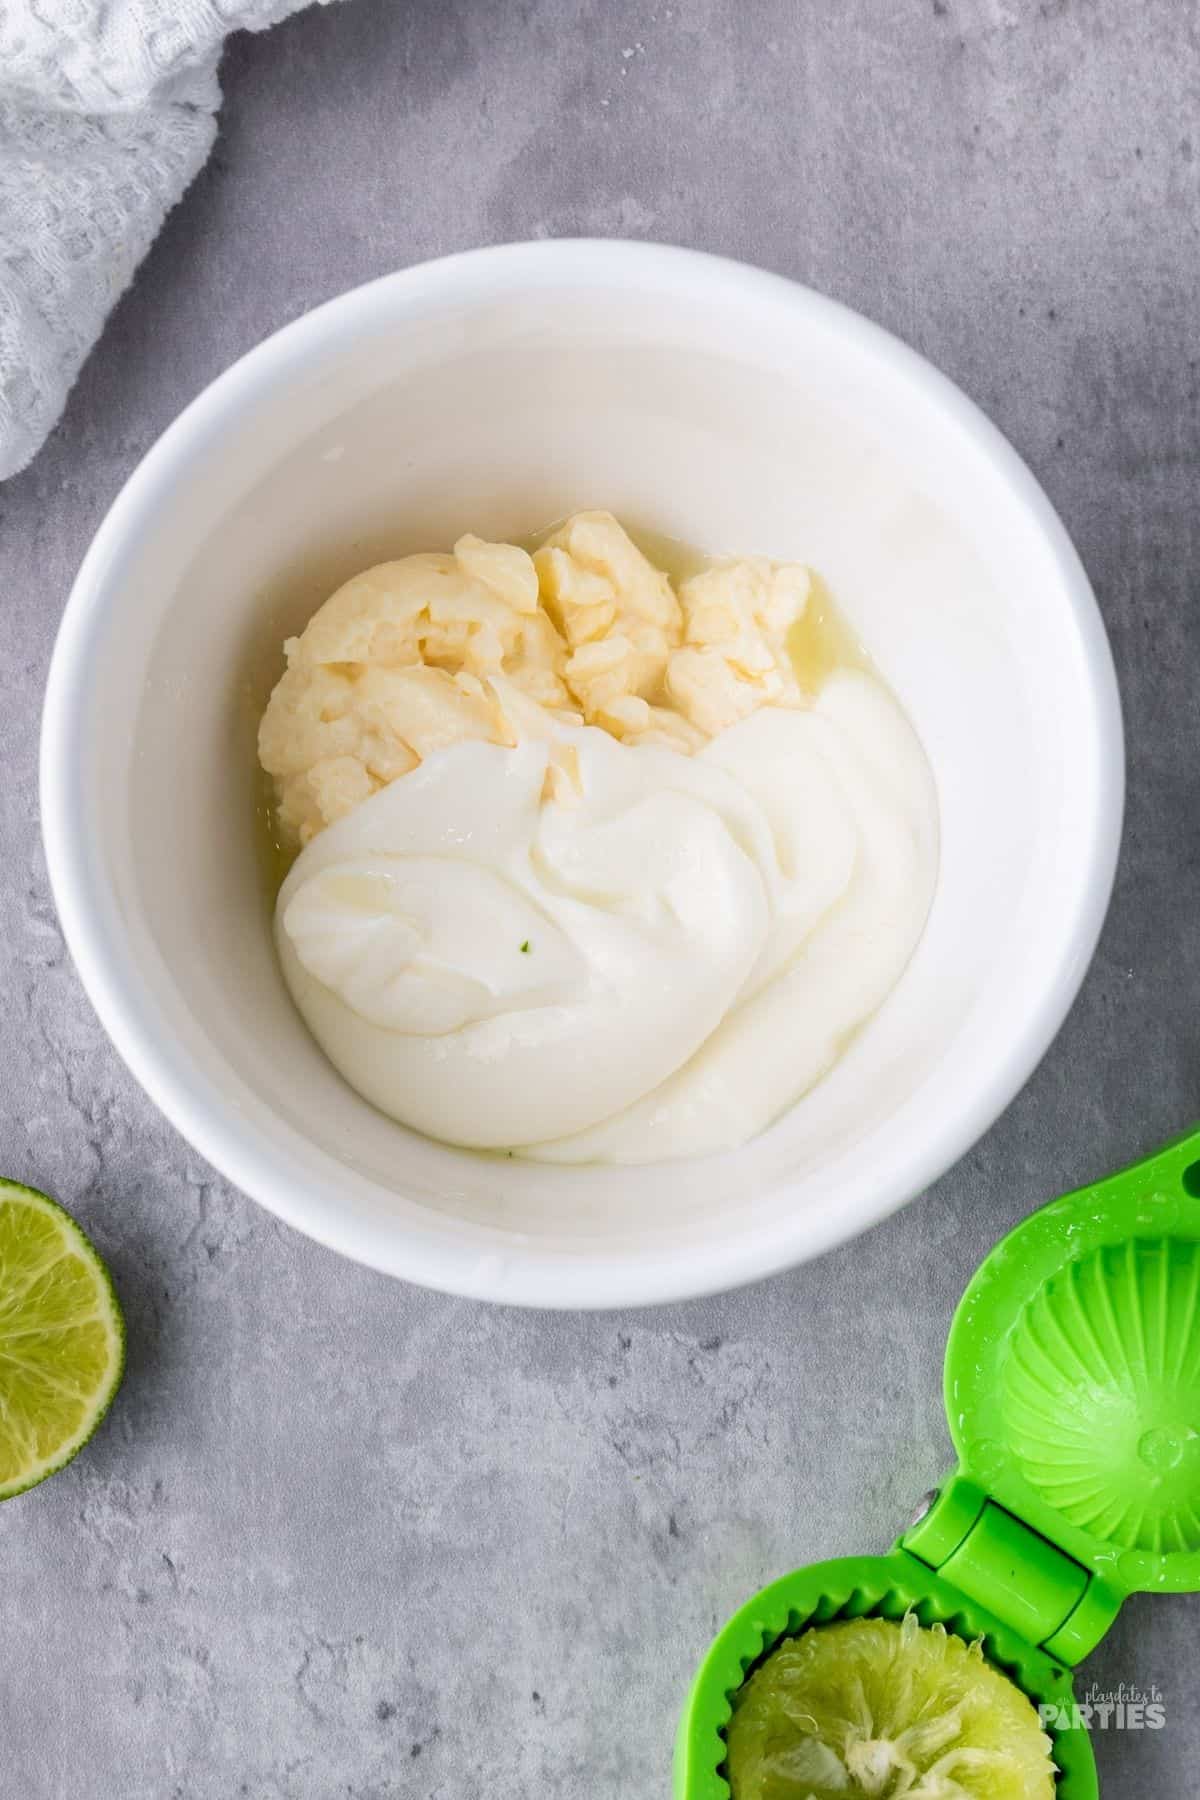 Mixing crema, mayonnaise, lime juice in a small bowl.